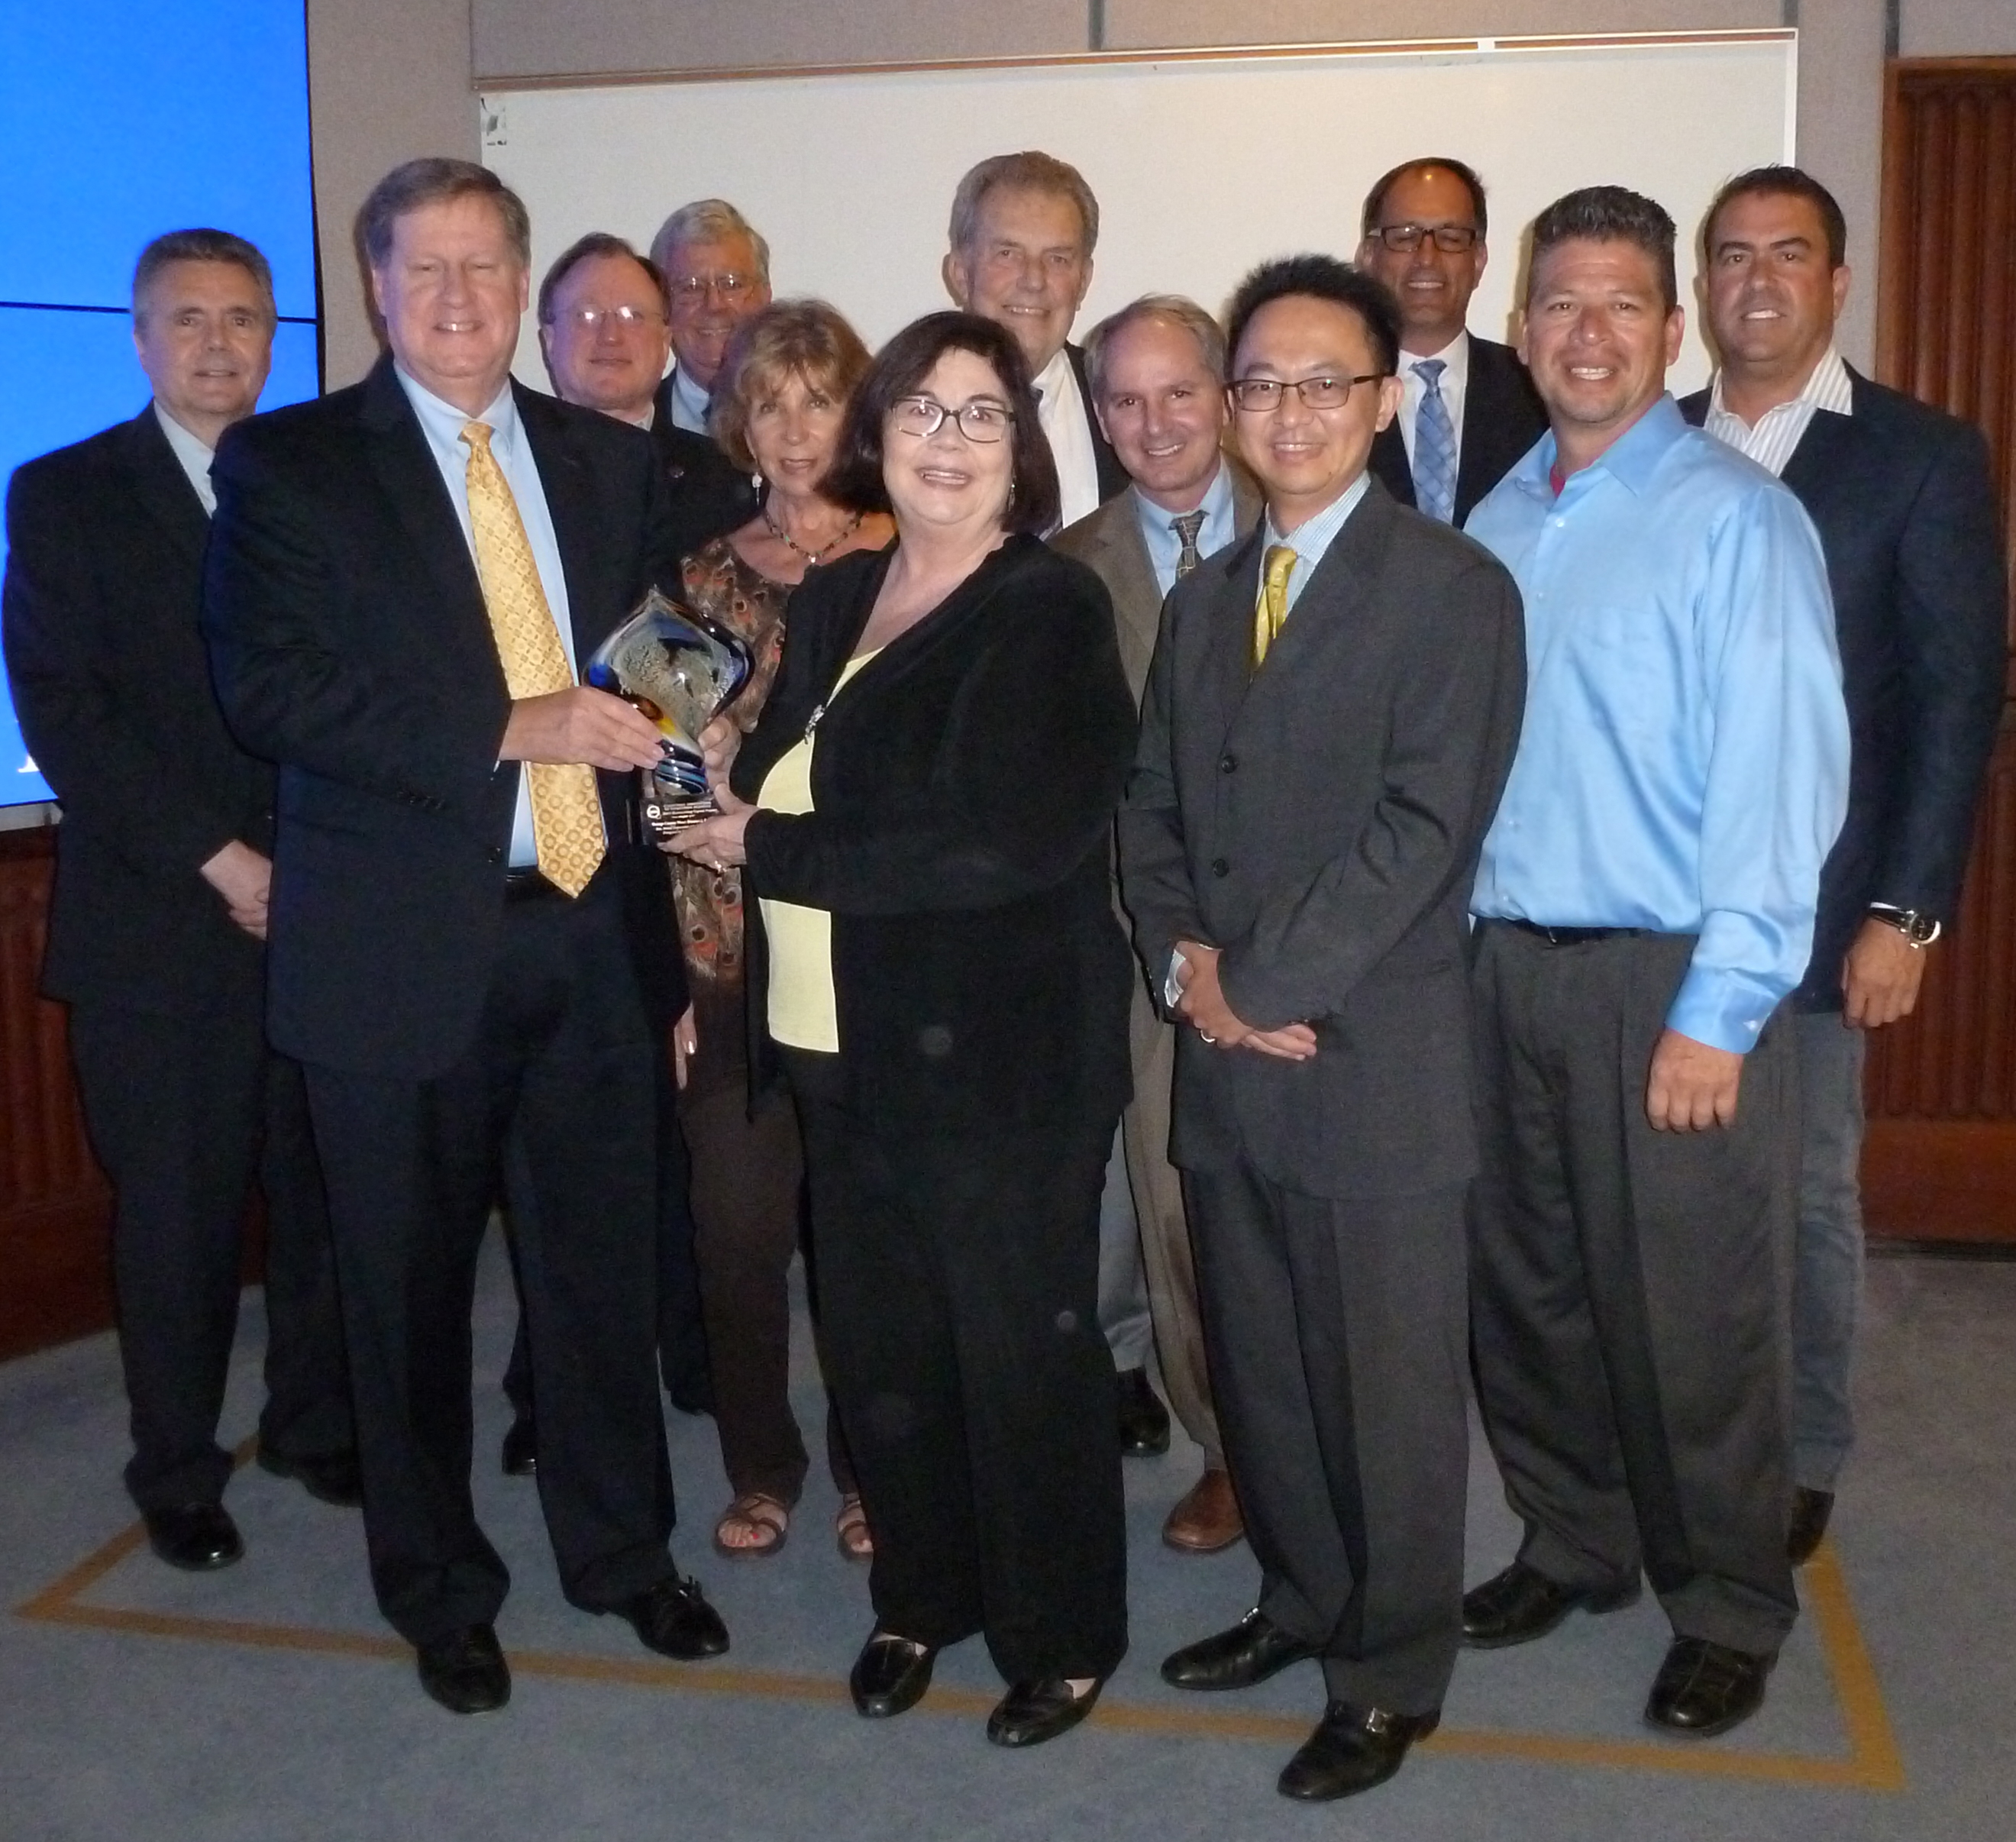 Board members and general managers from OCWD and OCSD accept the CASA Achievement Award at the Sept. 16 OCWD Board Meeting